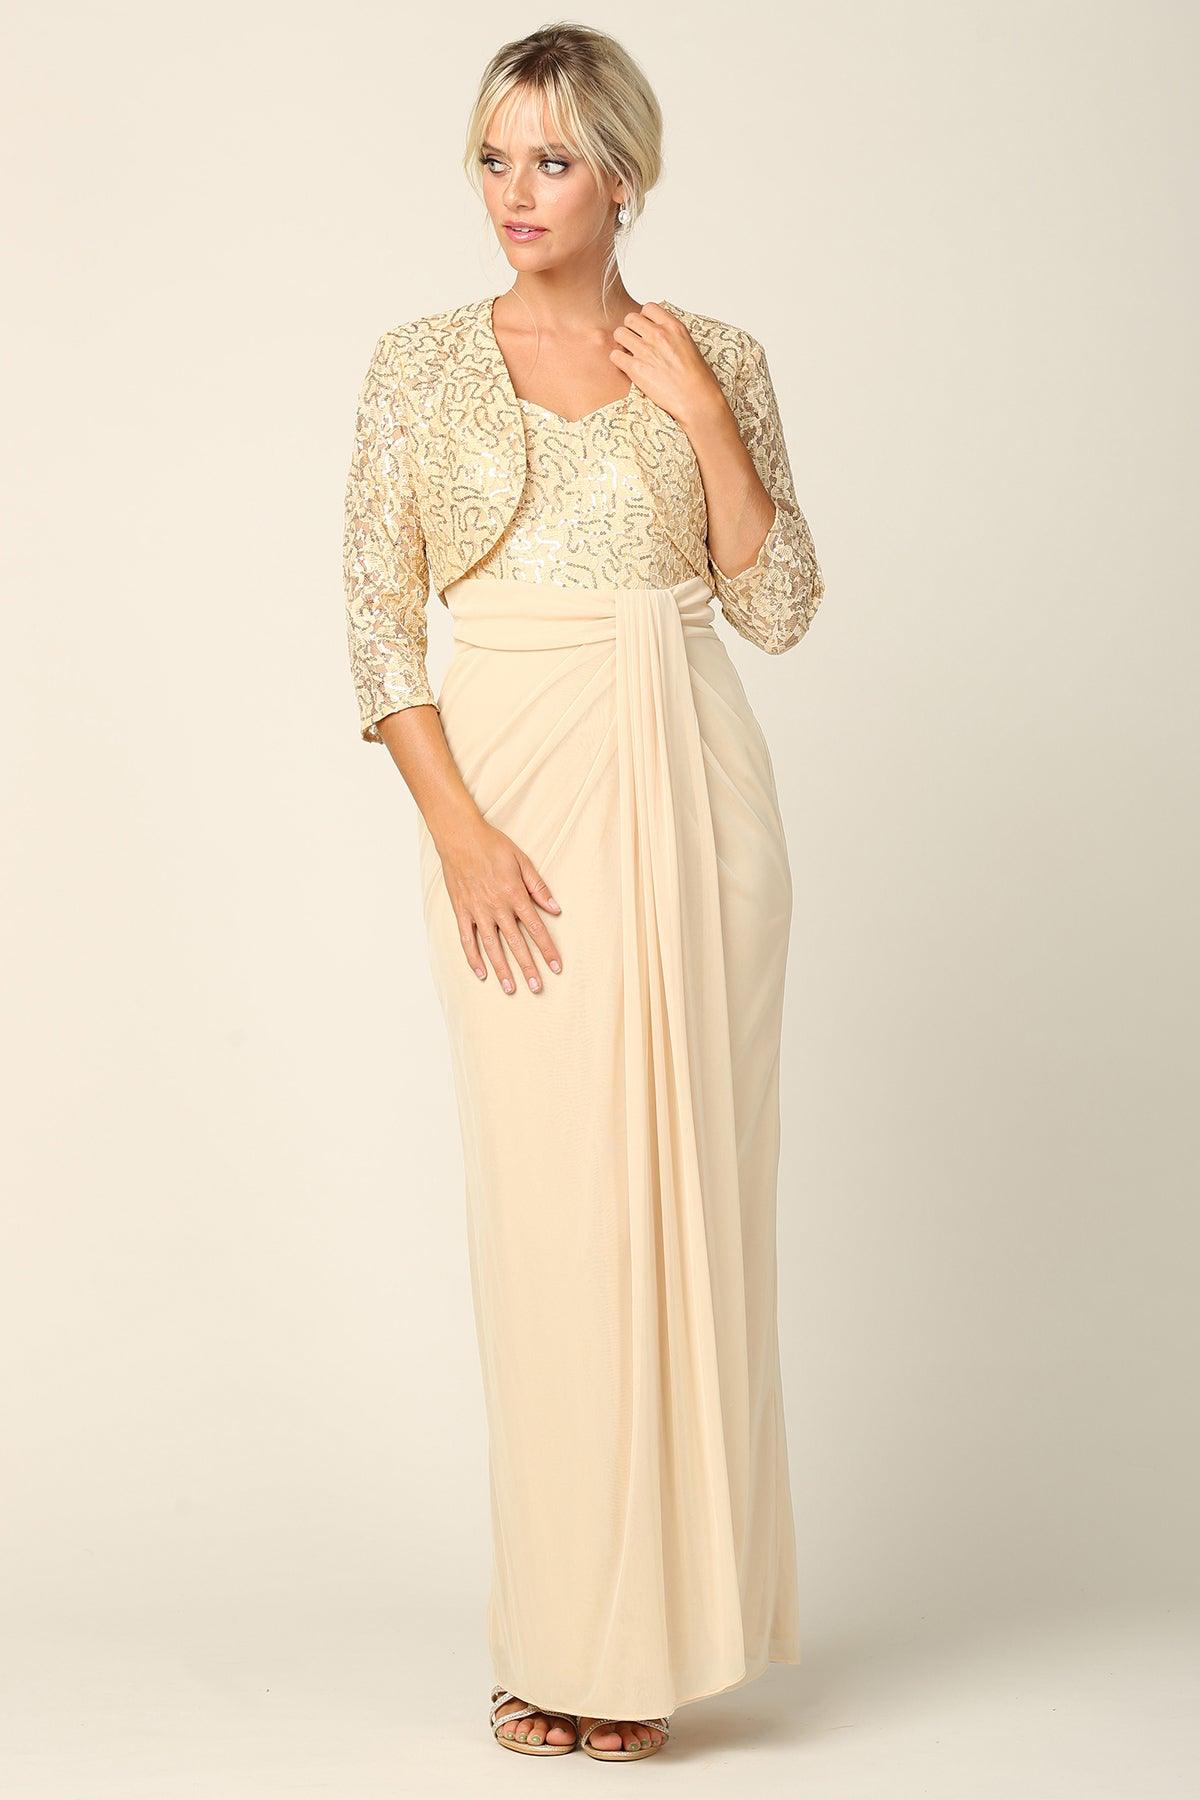 Long Mother of the Bride 2 Piece Formal Bolero Dress - The Dress Outlet